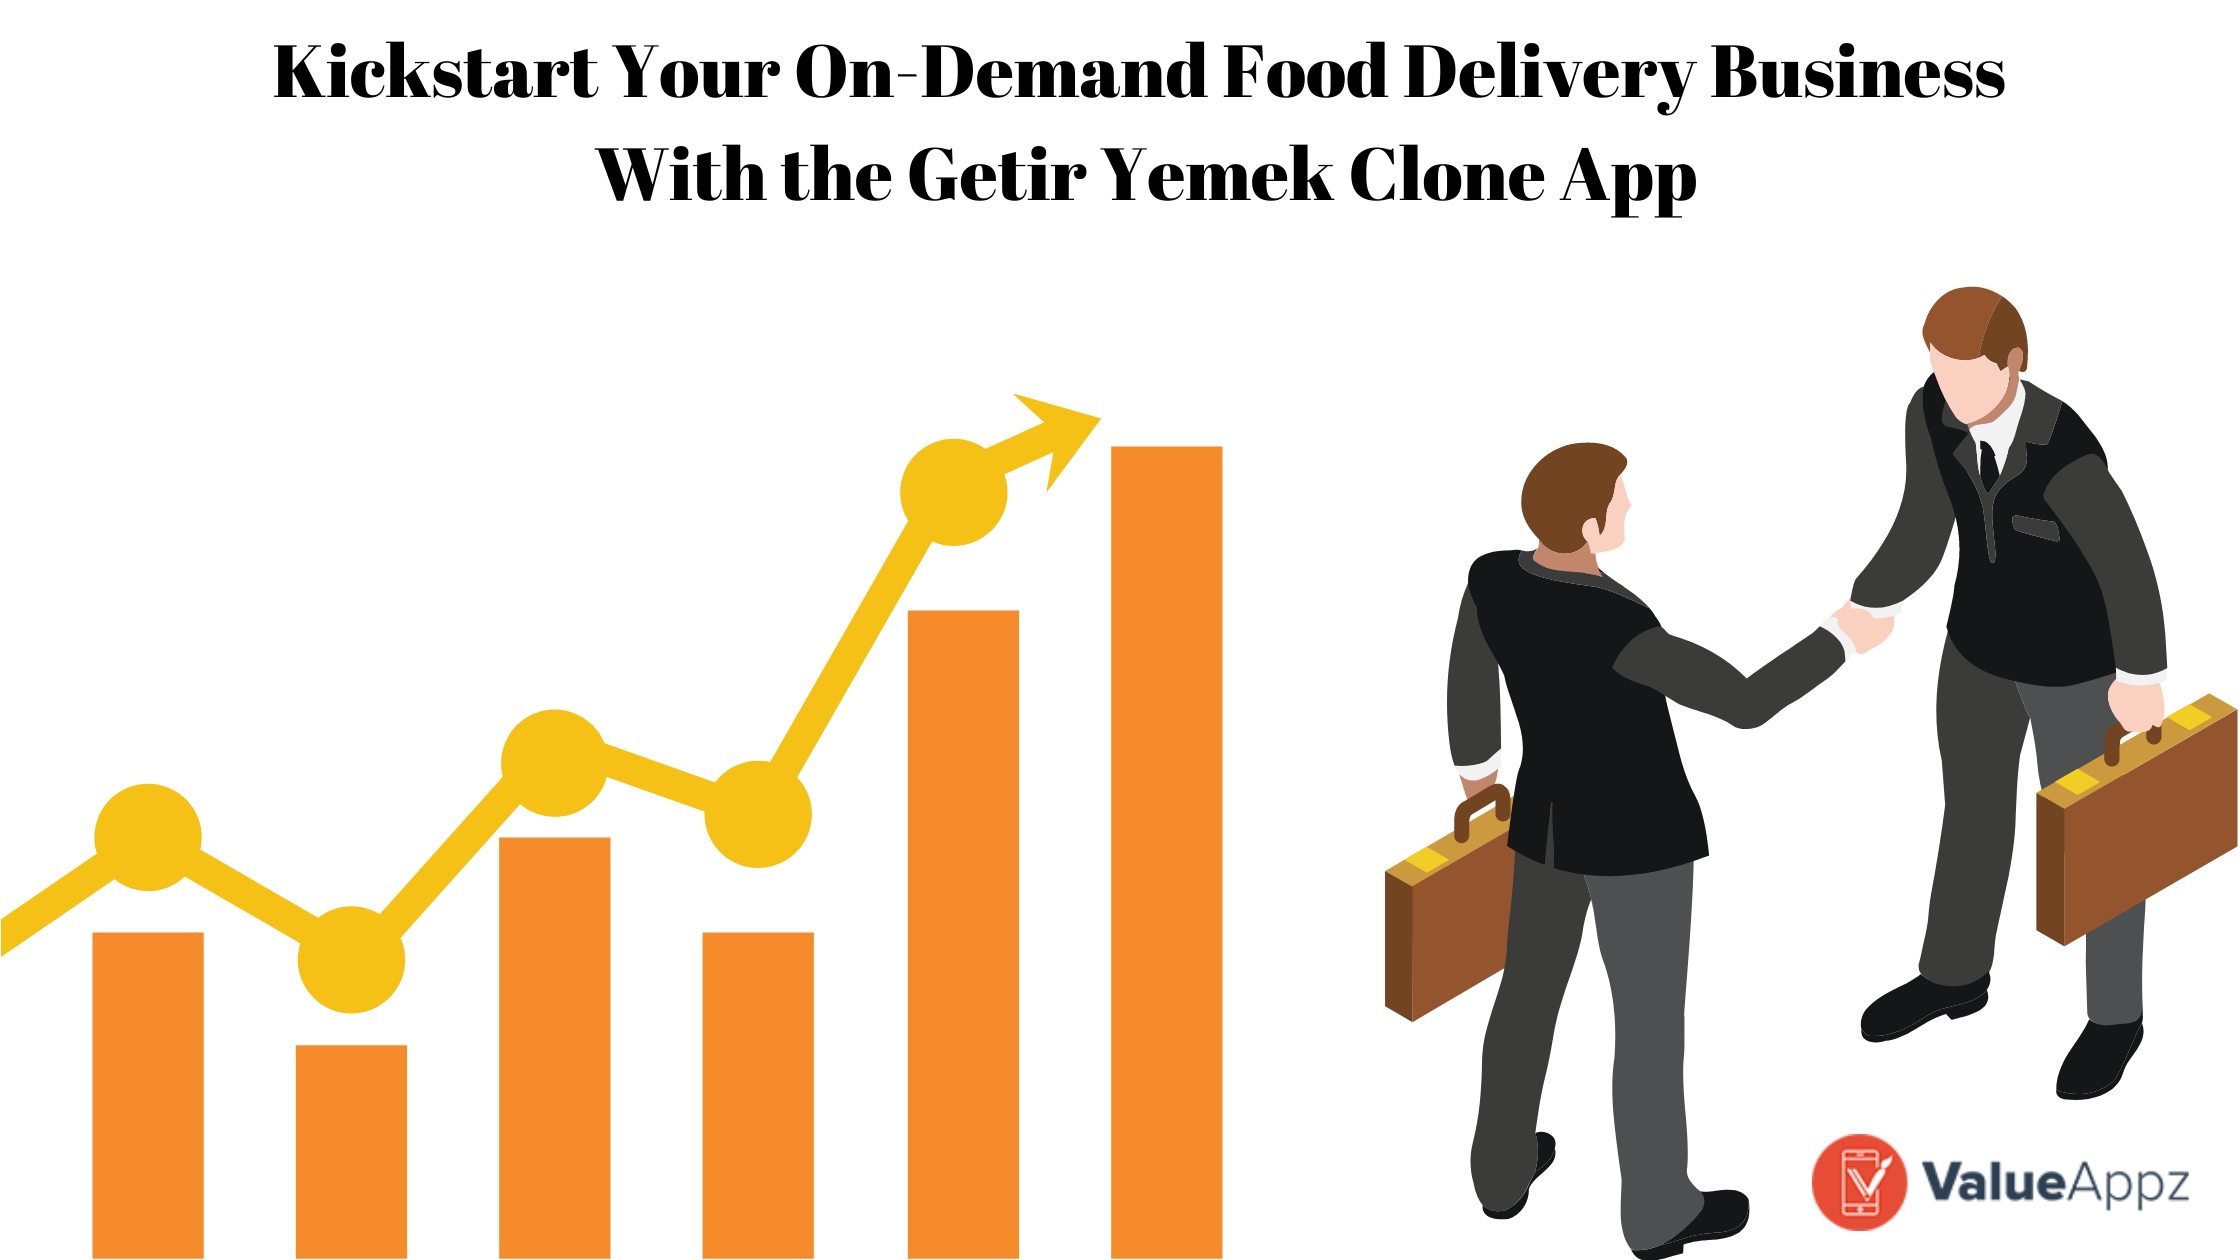 Kickstart Your On-Demand Food Delivery Business With the Getir Yemek Clone App